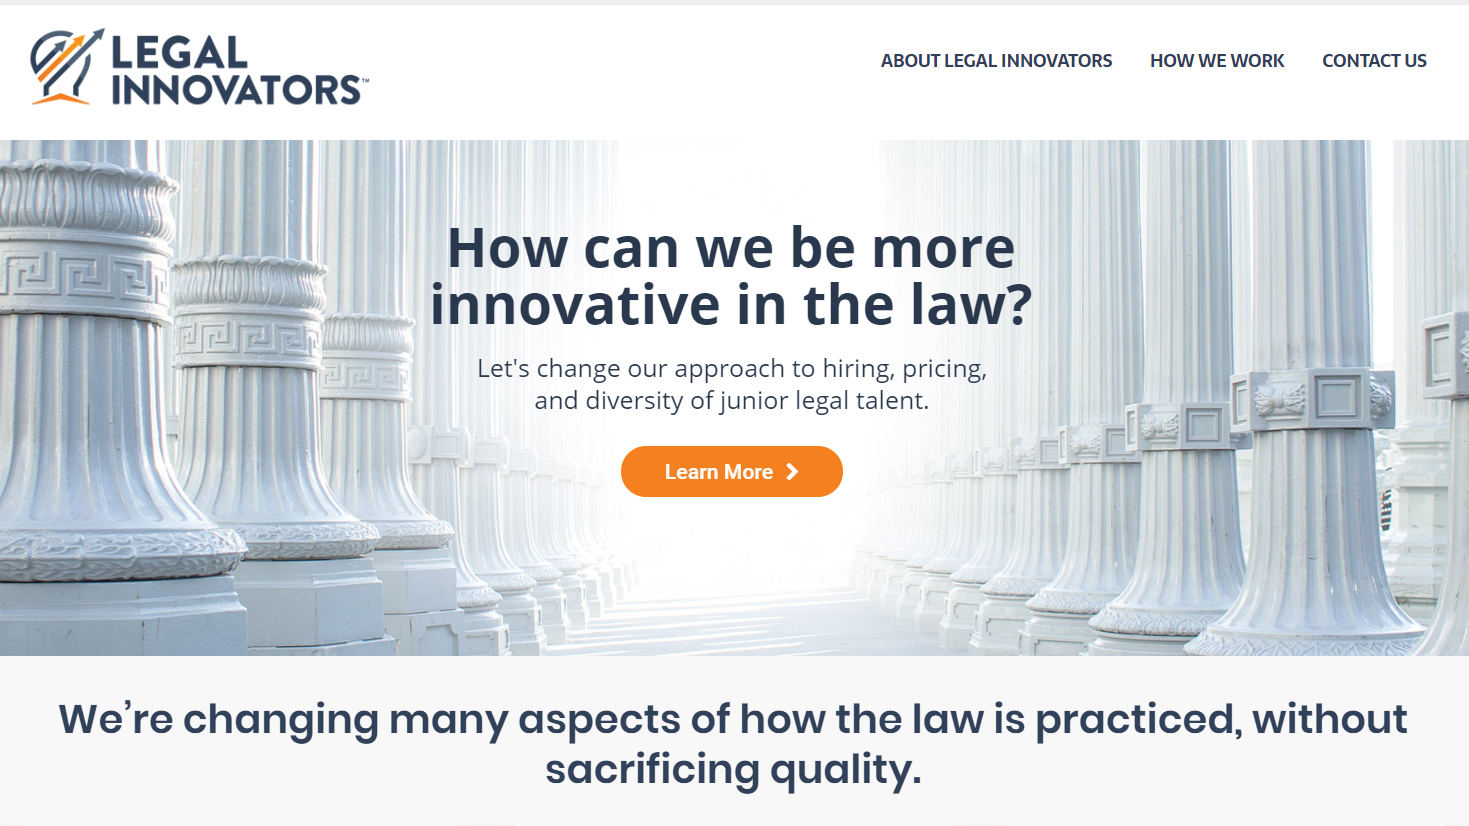 Legal Innovators, ALSP that Promotes Diversity, Enters Deal with Global Engineering Firm Bechtel